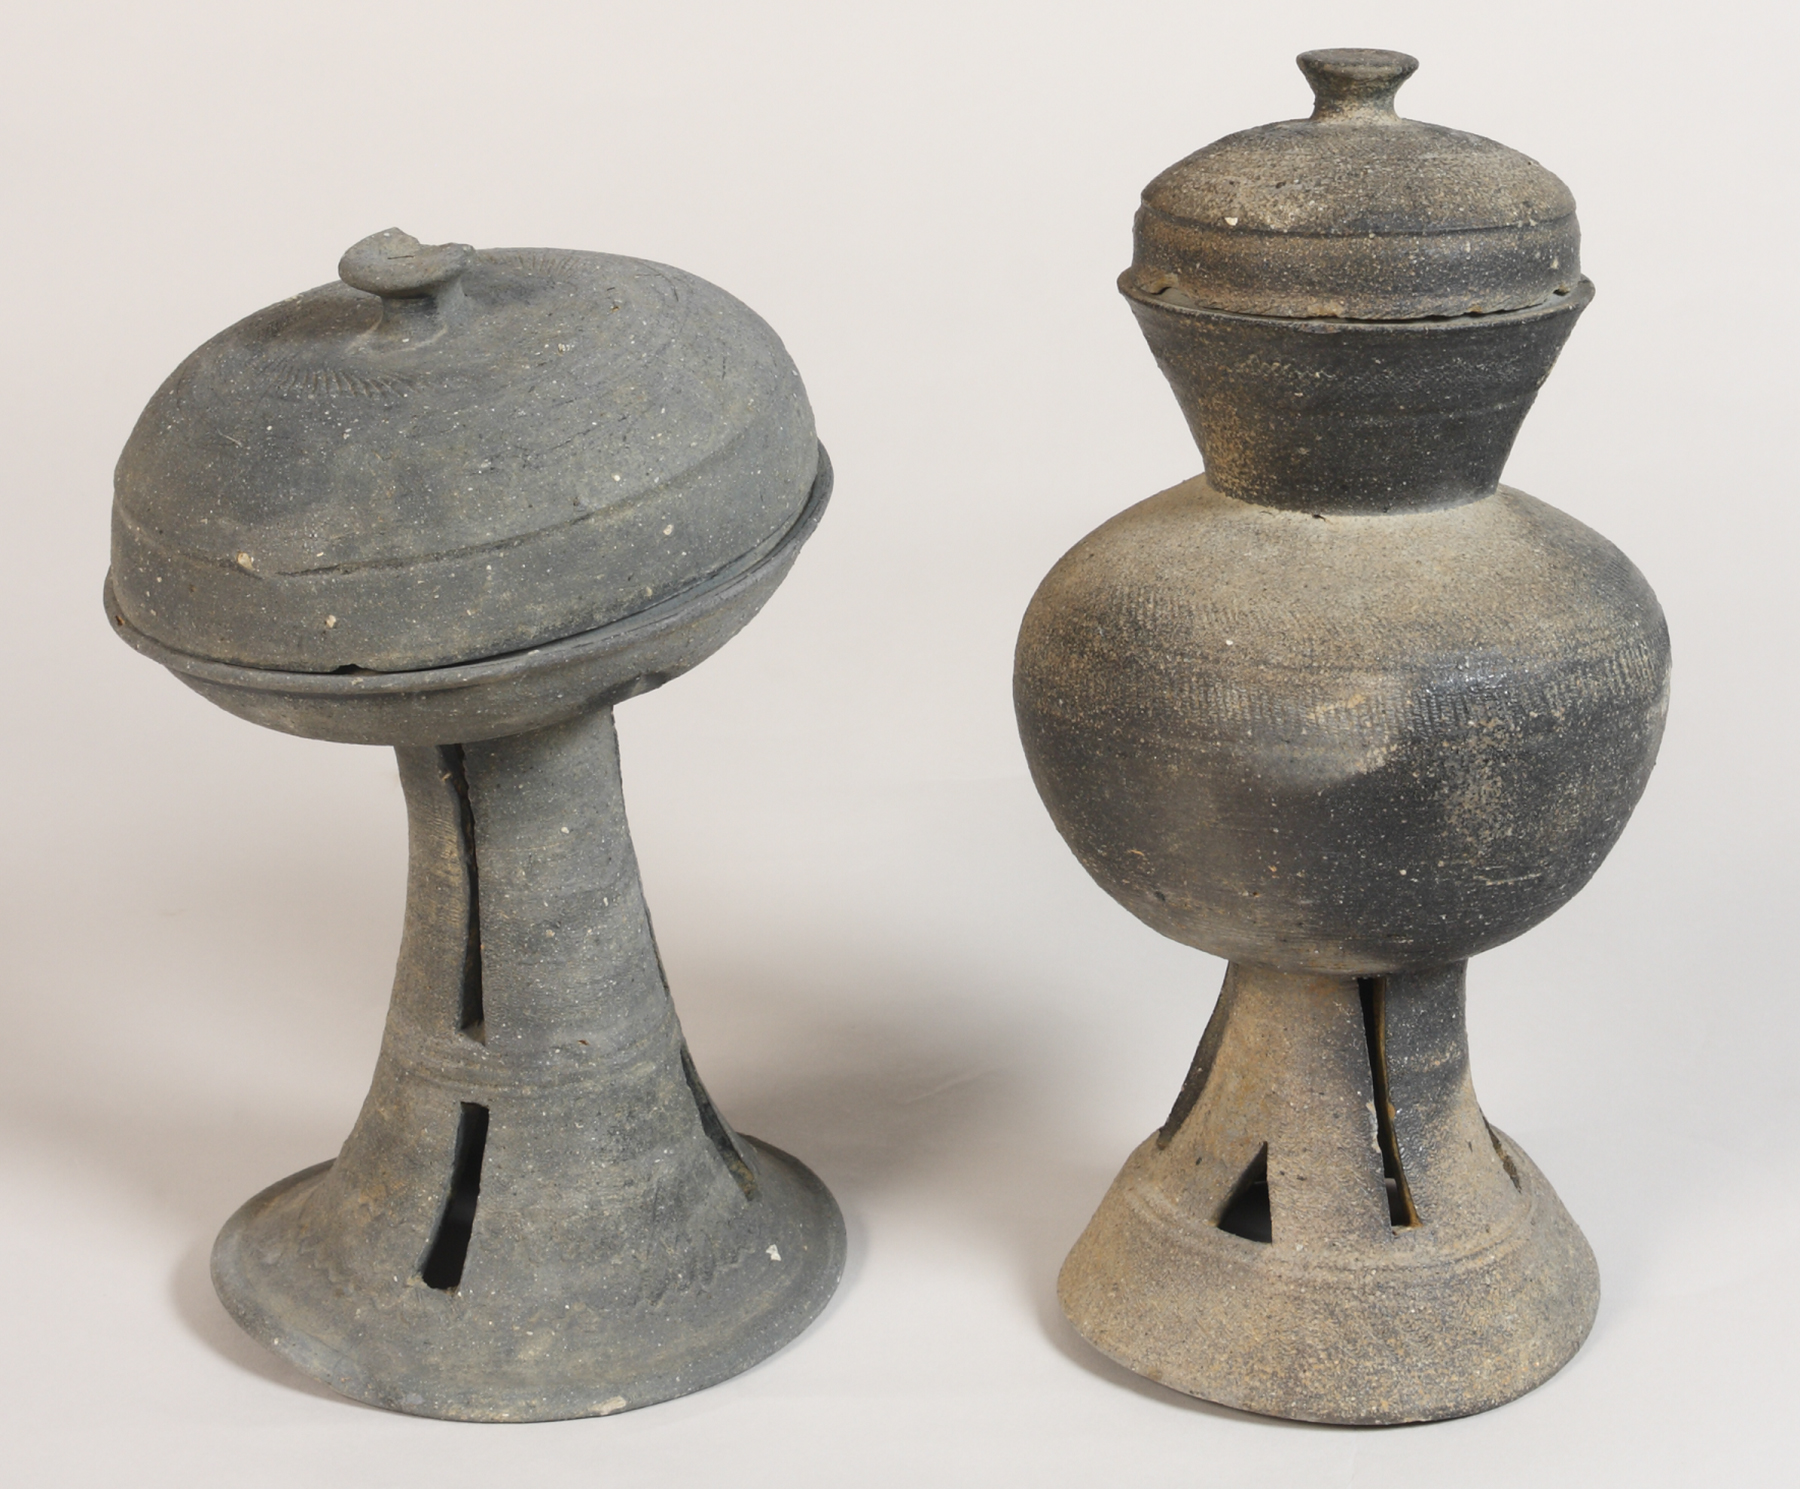 Lidded stem cup	/ Lidded pot with stand